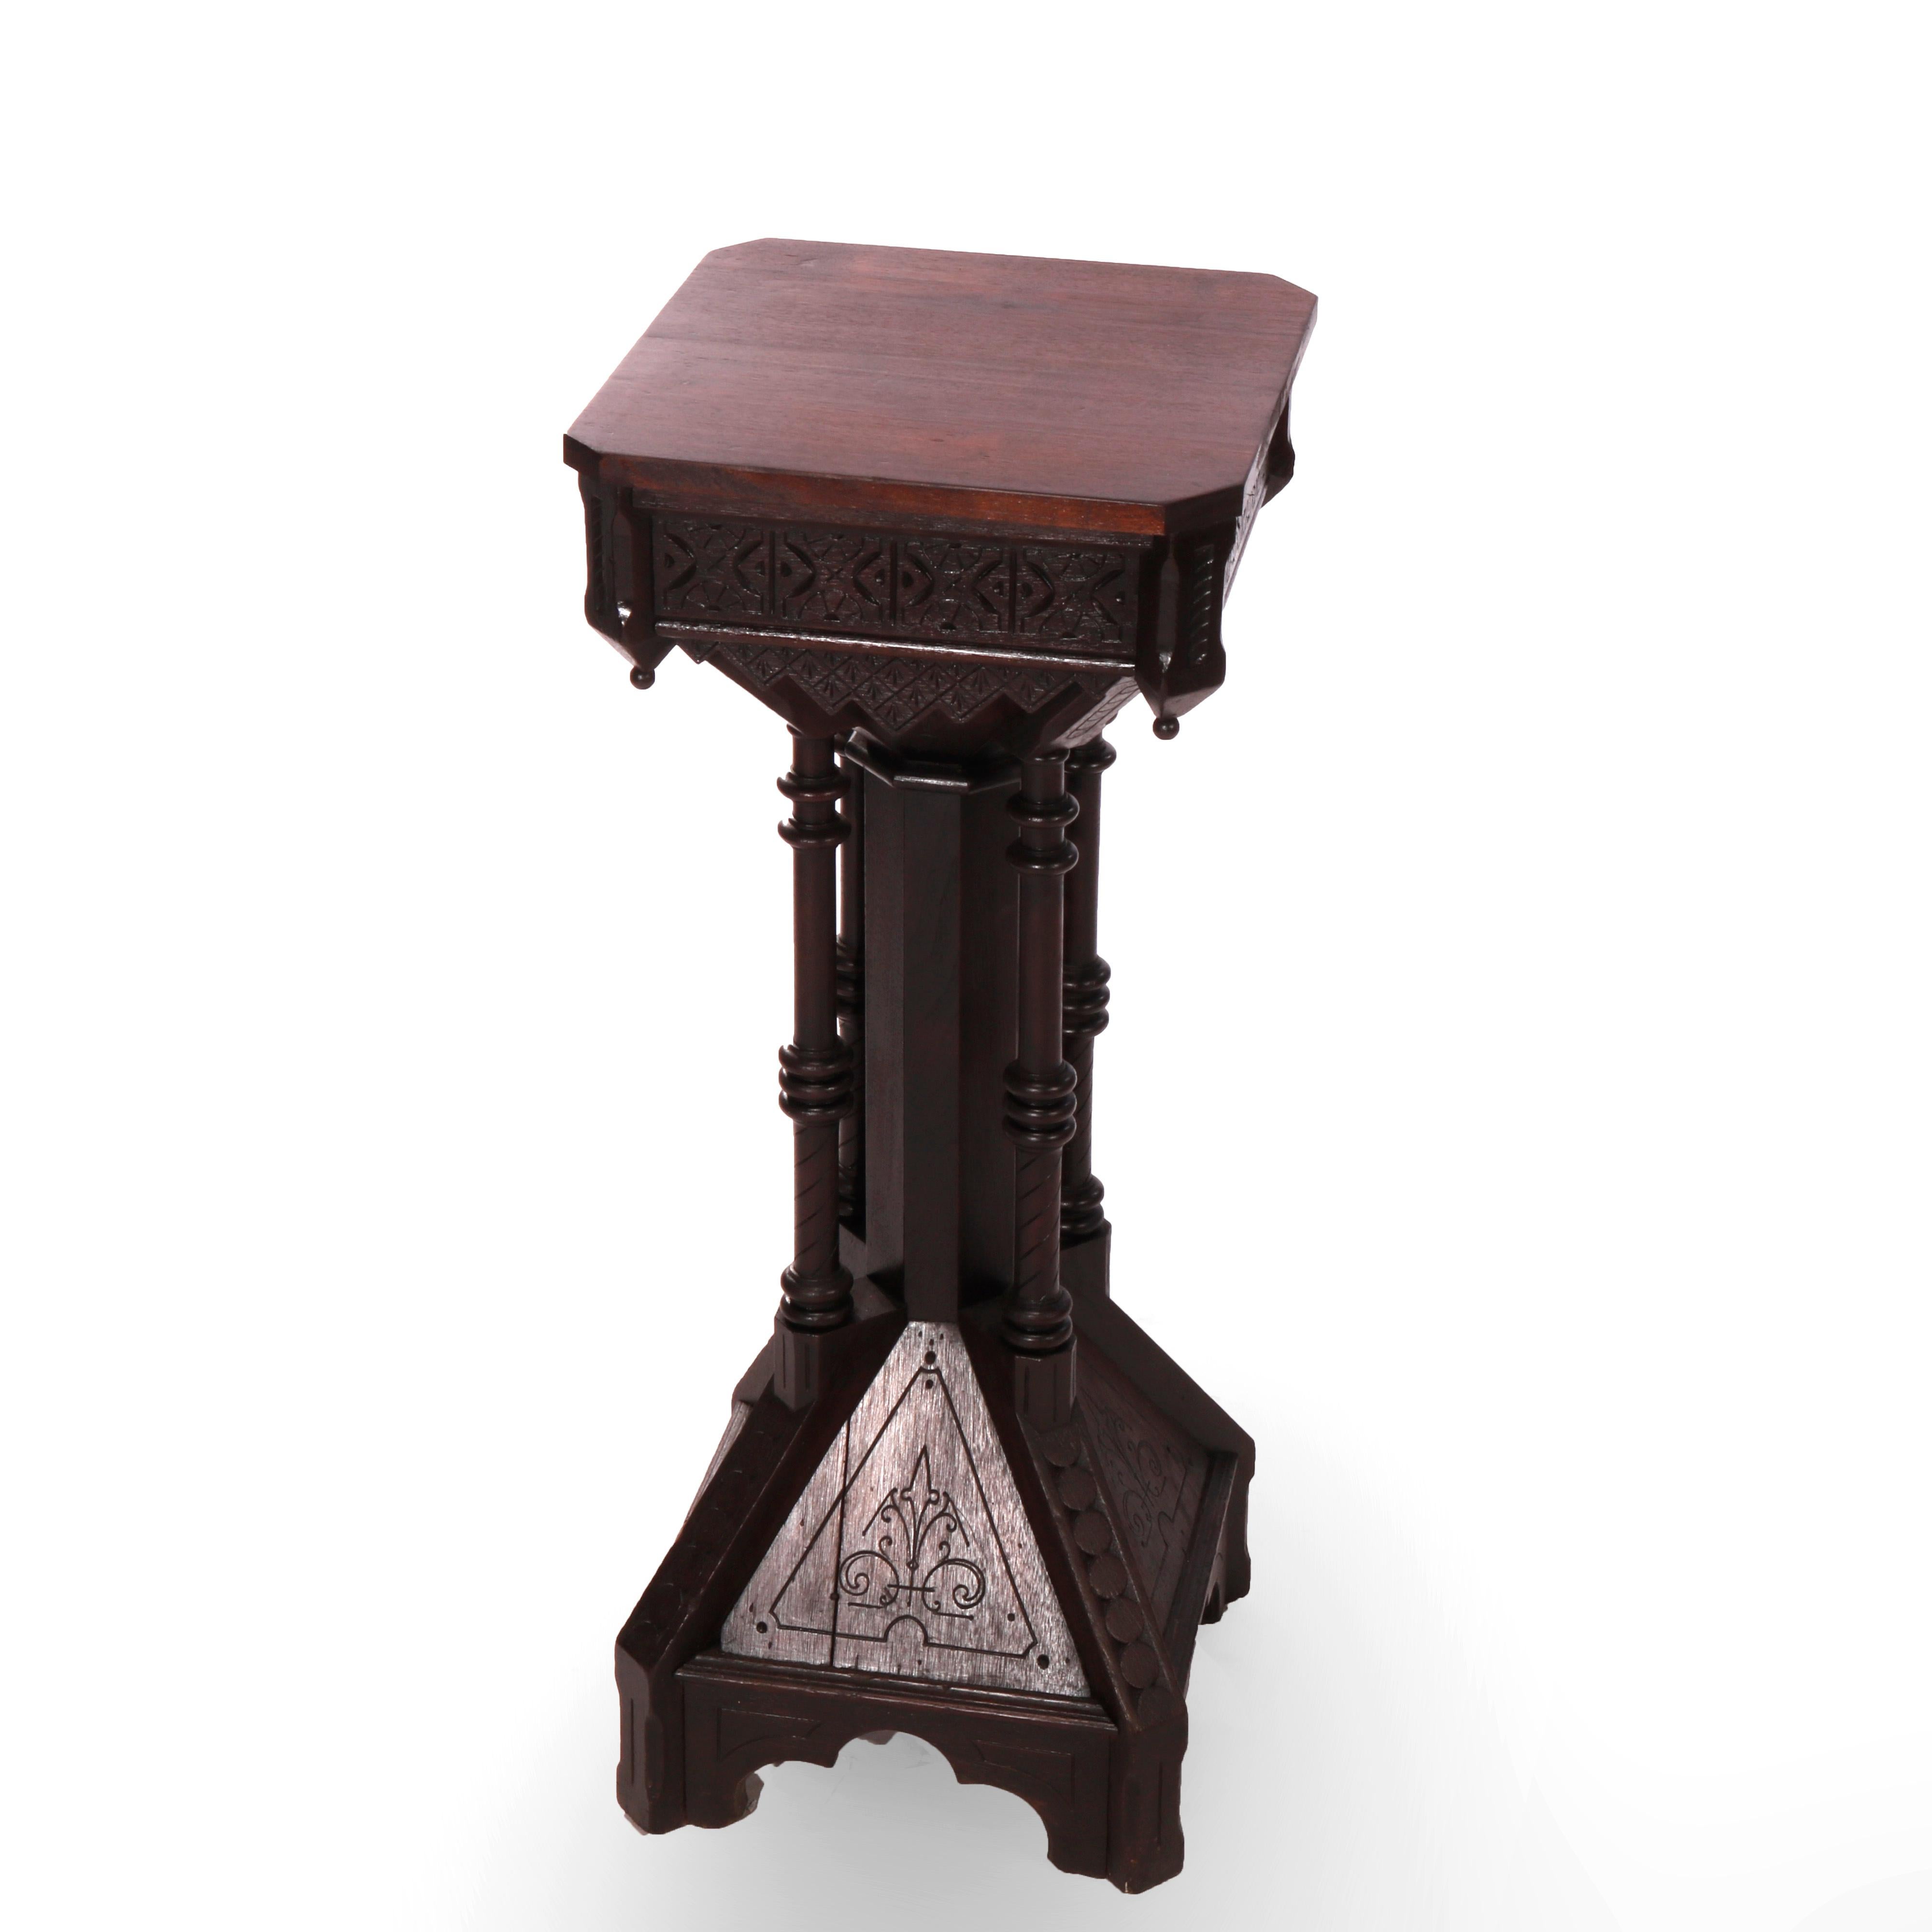 An antique Aesthetic movement sculpture pedestal offers walnut construction with clip corner display over column having four turned supports raised on flared base with incised floral decoration, c1870

Measures - 37.75''H X 15.25''W X 15.25''D.